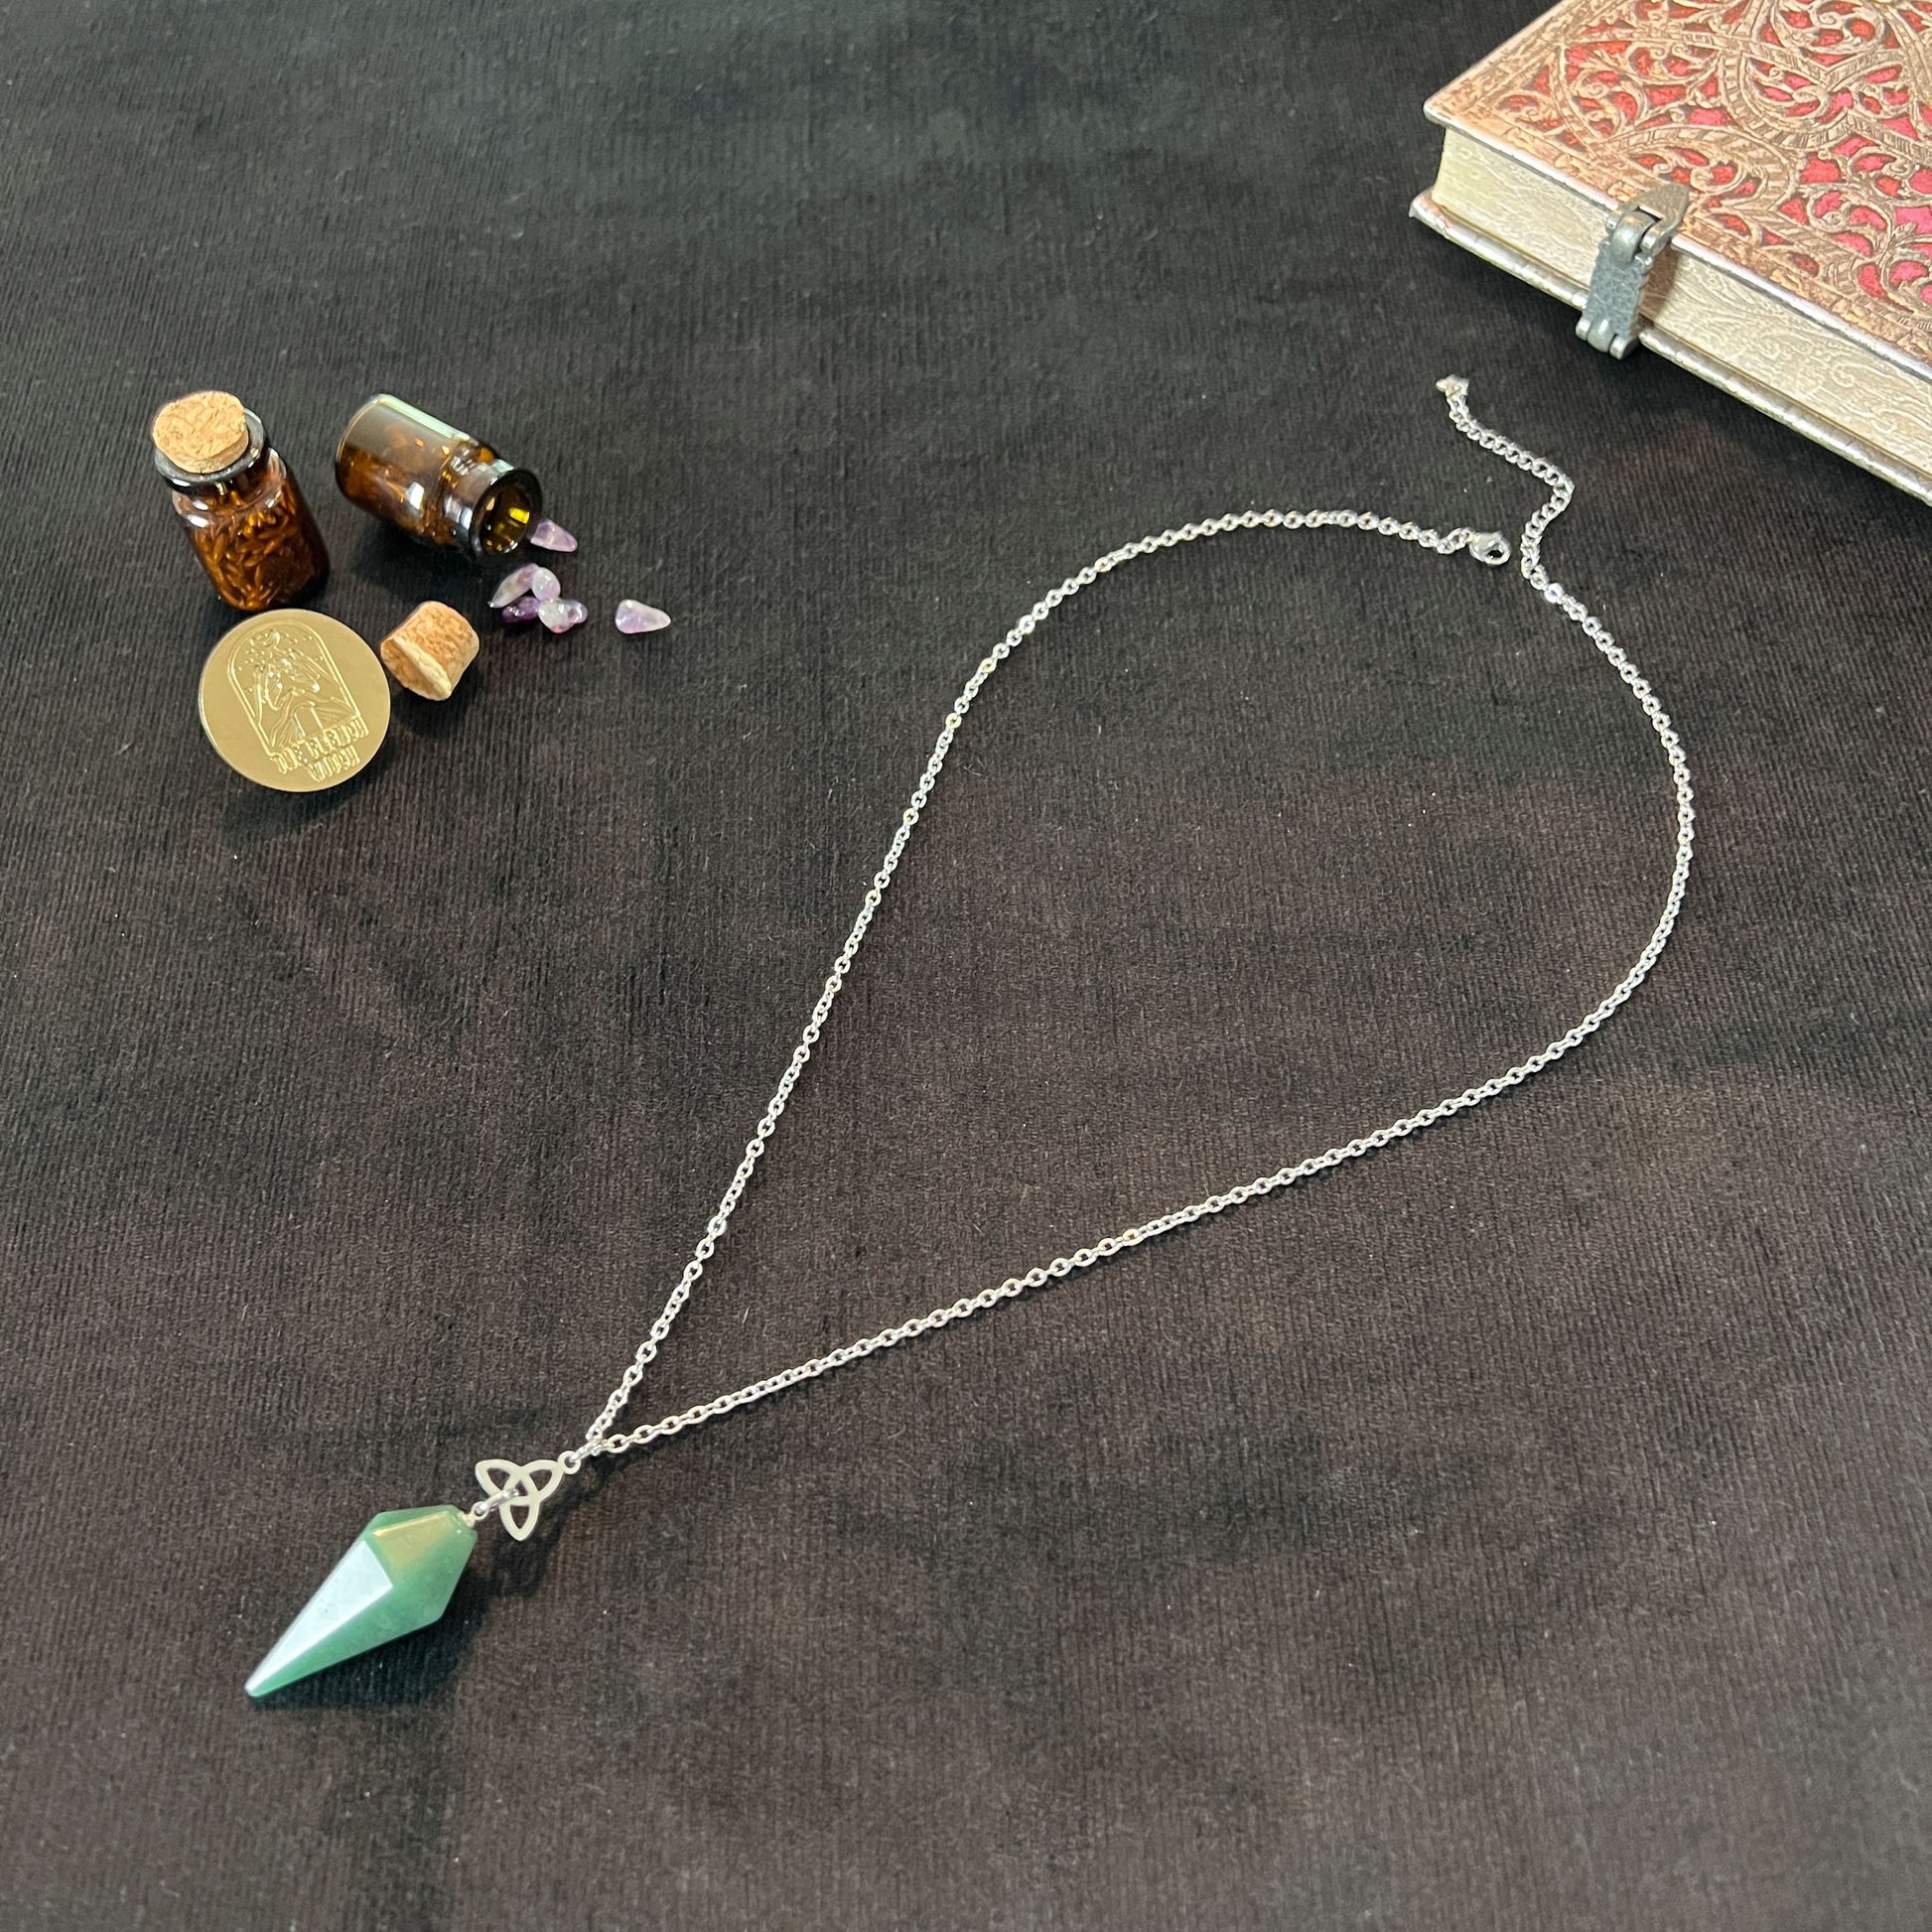 aventurine gemstone pendulum necklace witch divination tool with triquetra celtic knot pagan witchcraft symbol for dowsing reiki psychic medium jewelry